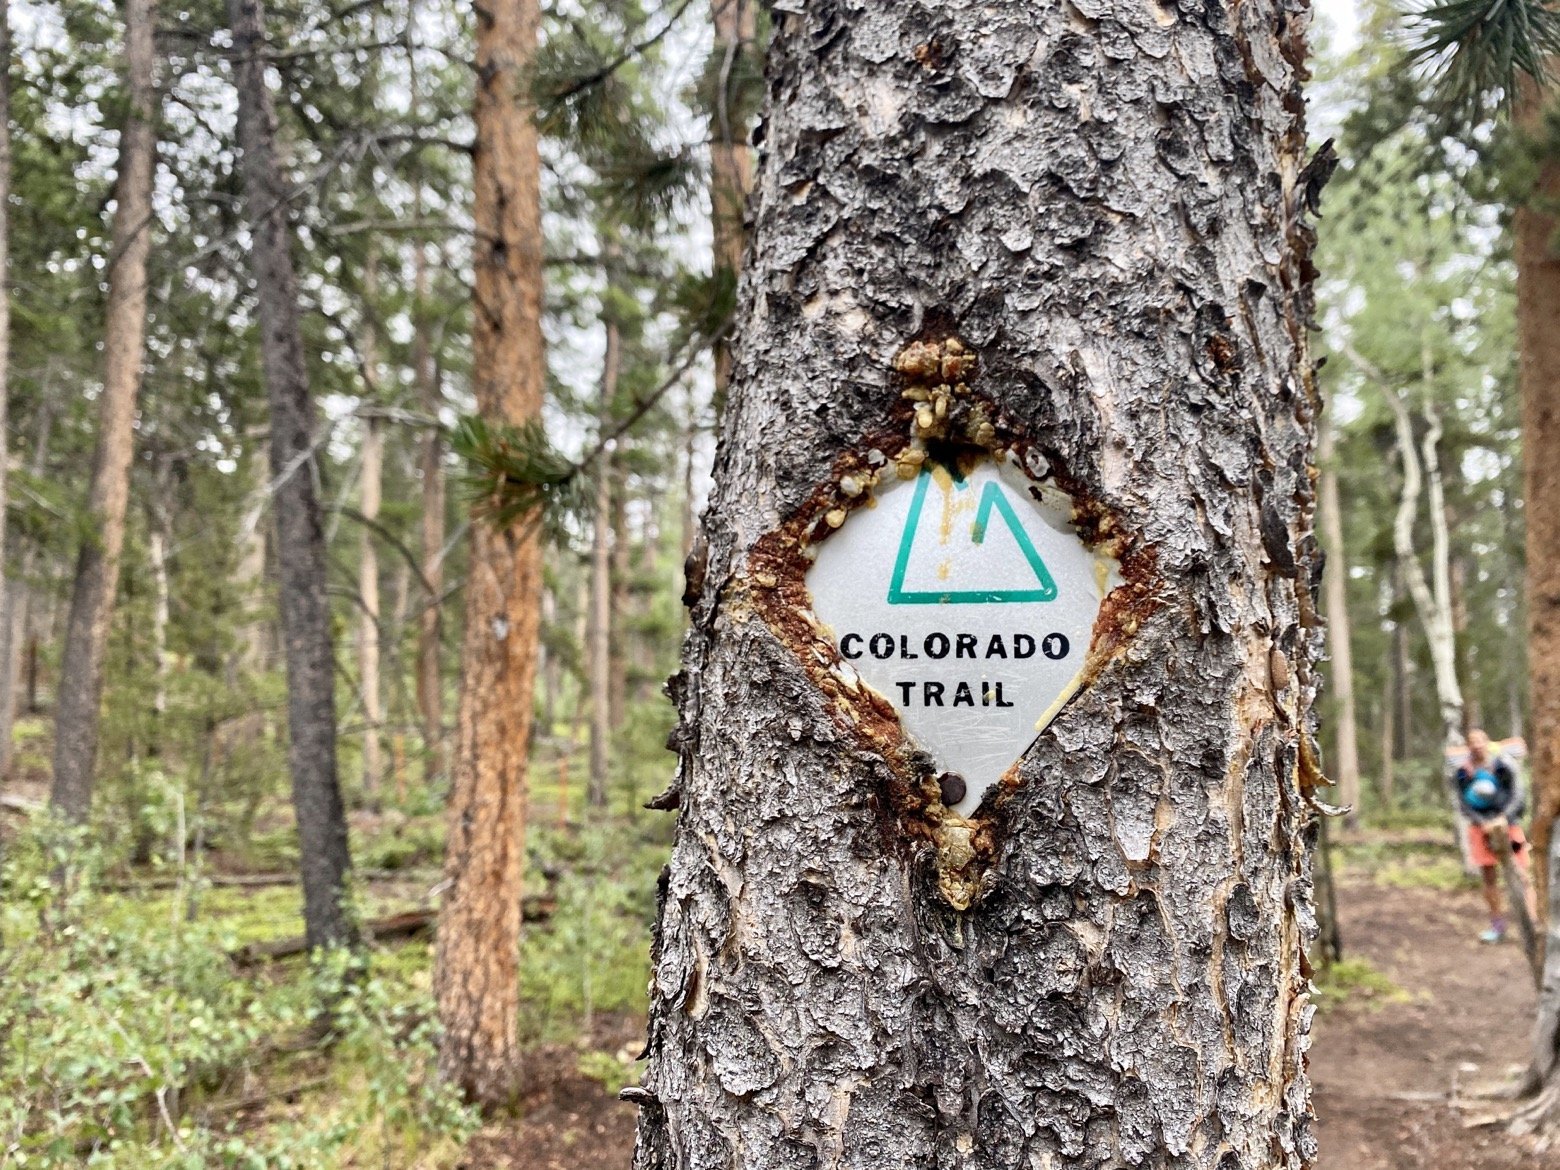 Trail sign swallowed by bark